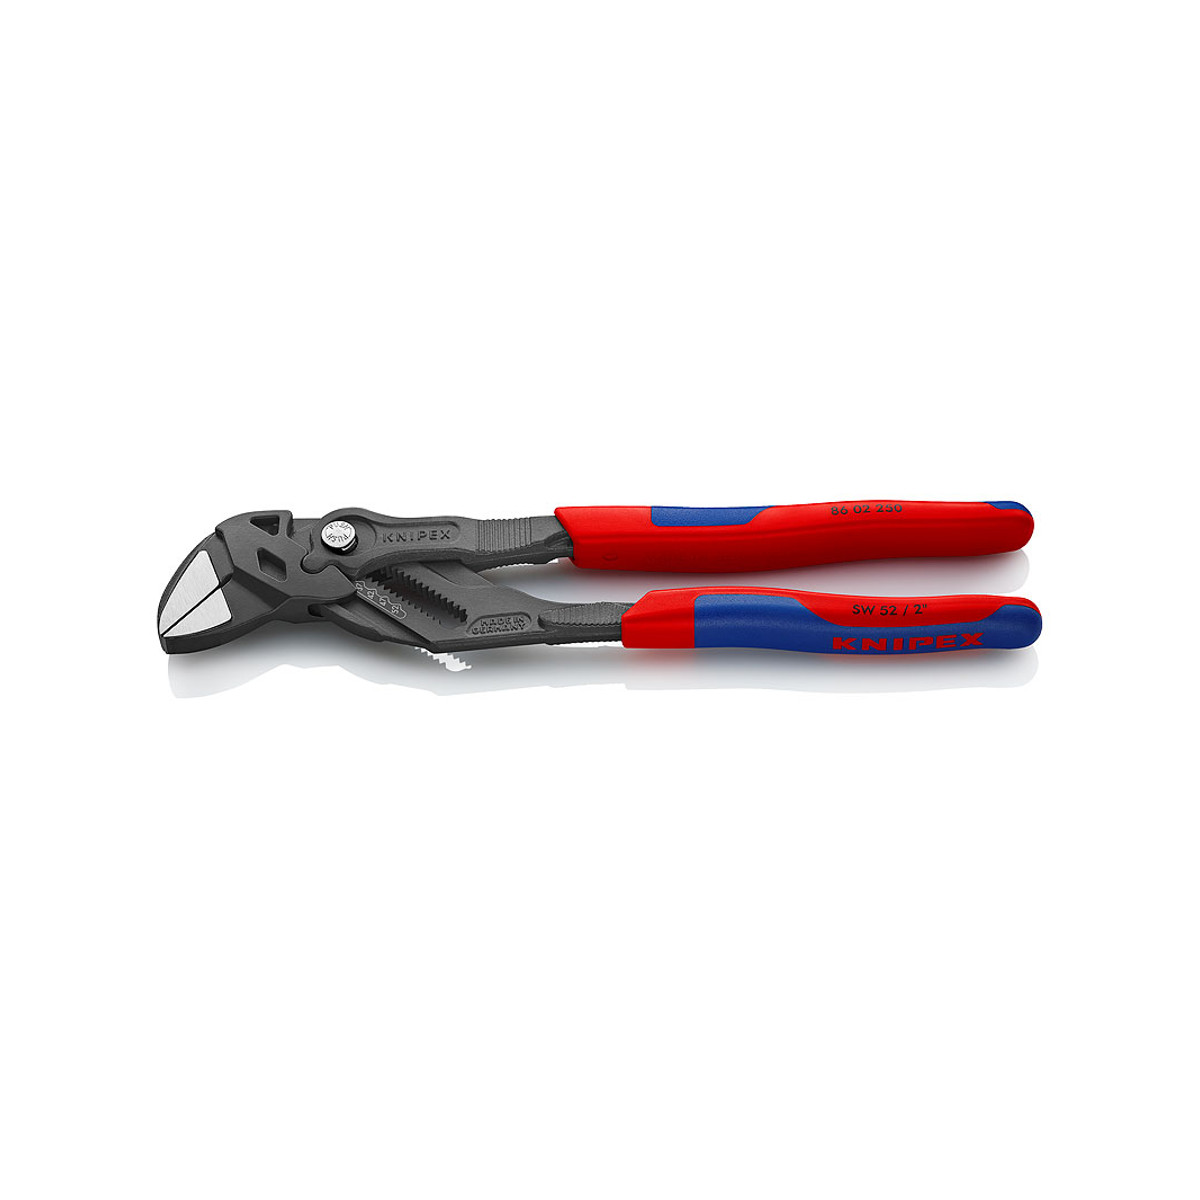 KNIPEX 86 02 250 Pliers wrench, 250.0 mm